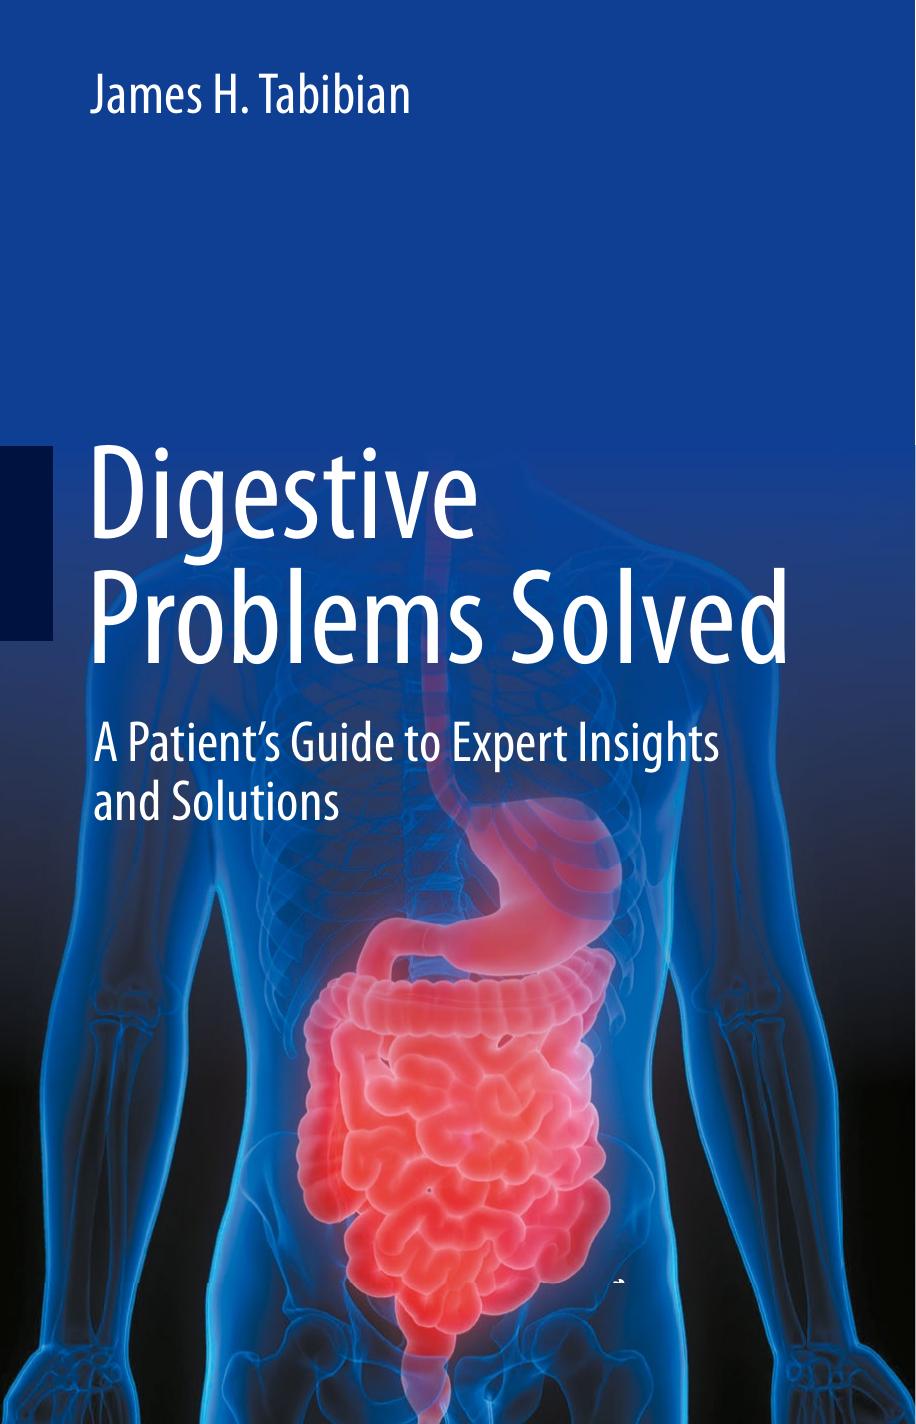 Digestive Problems Solved: A Patient's Guide to Expert Insights and Solutions by James H. Tabibian